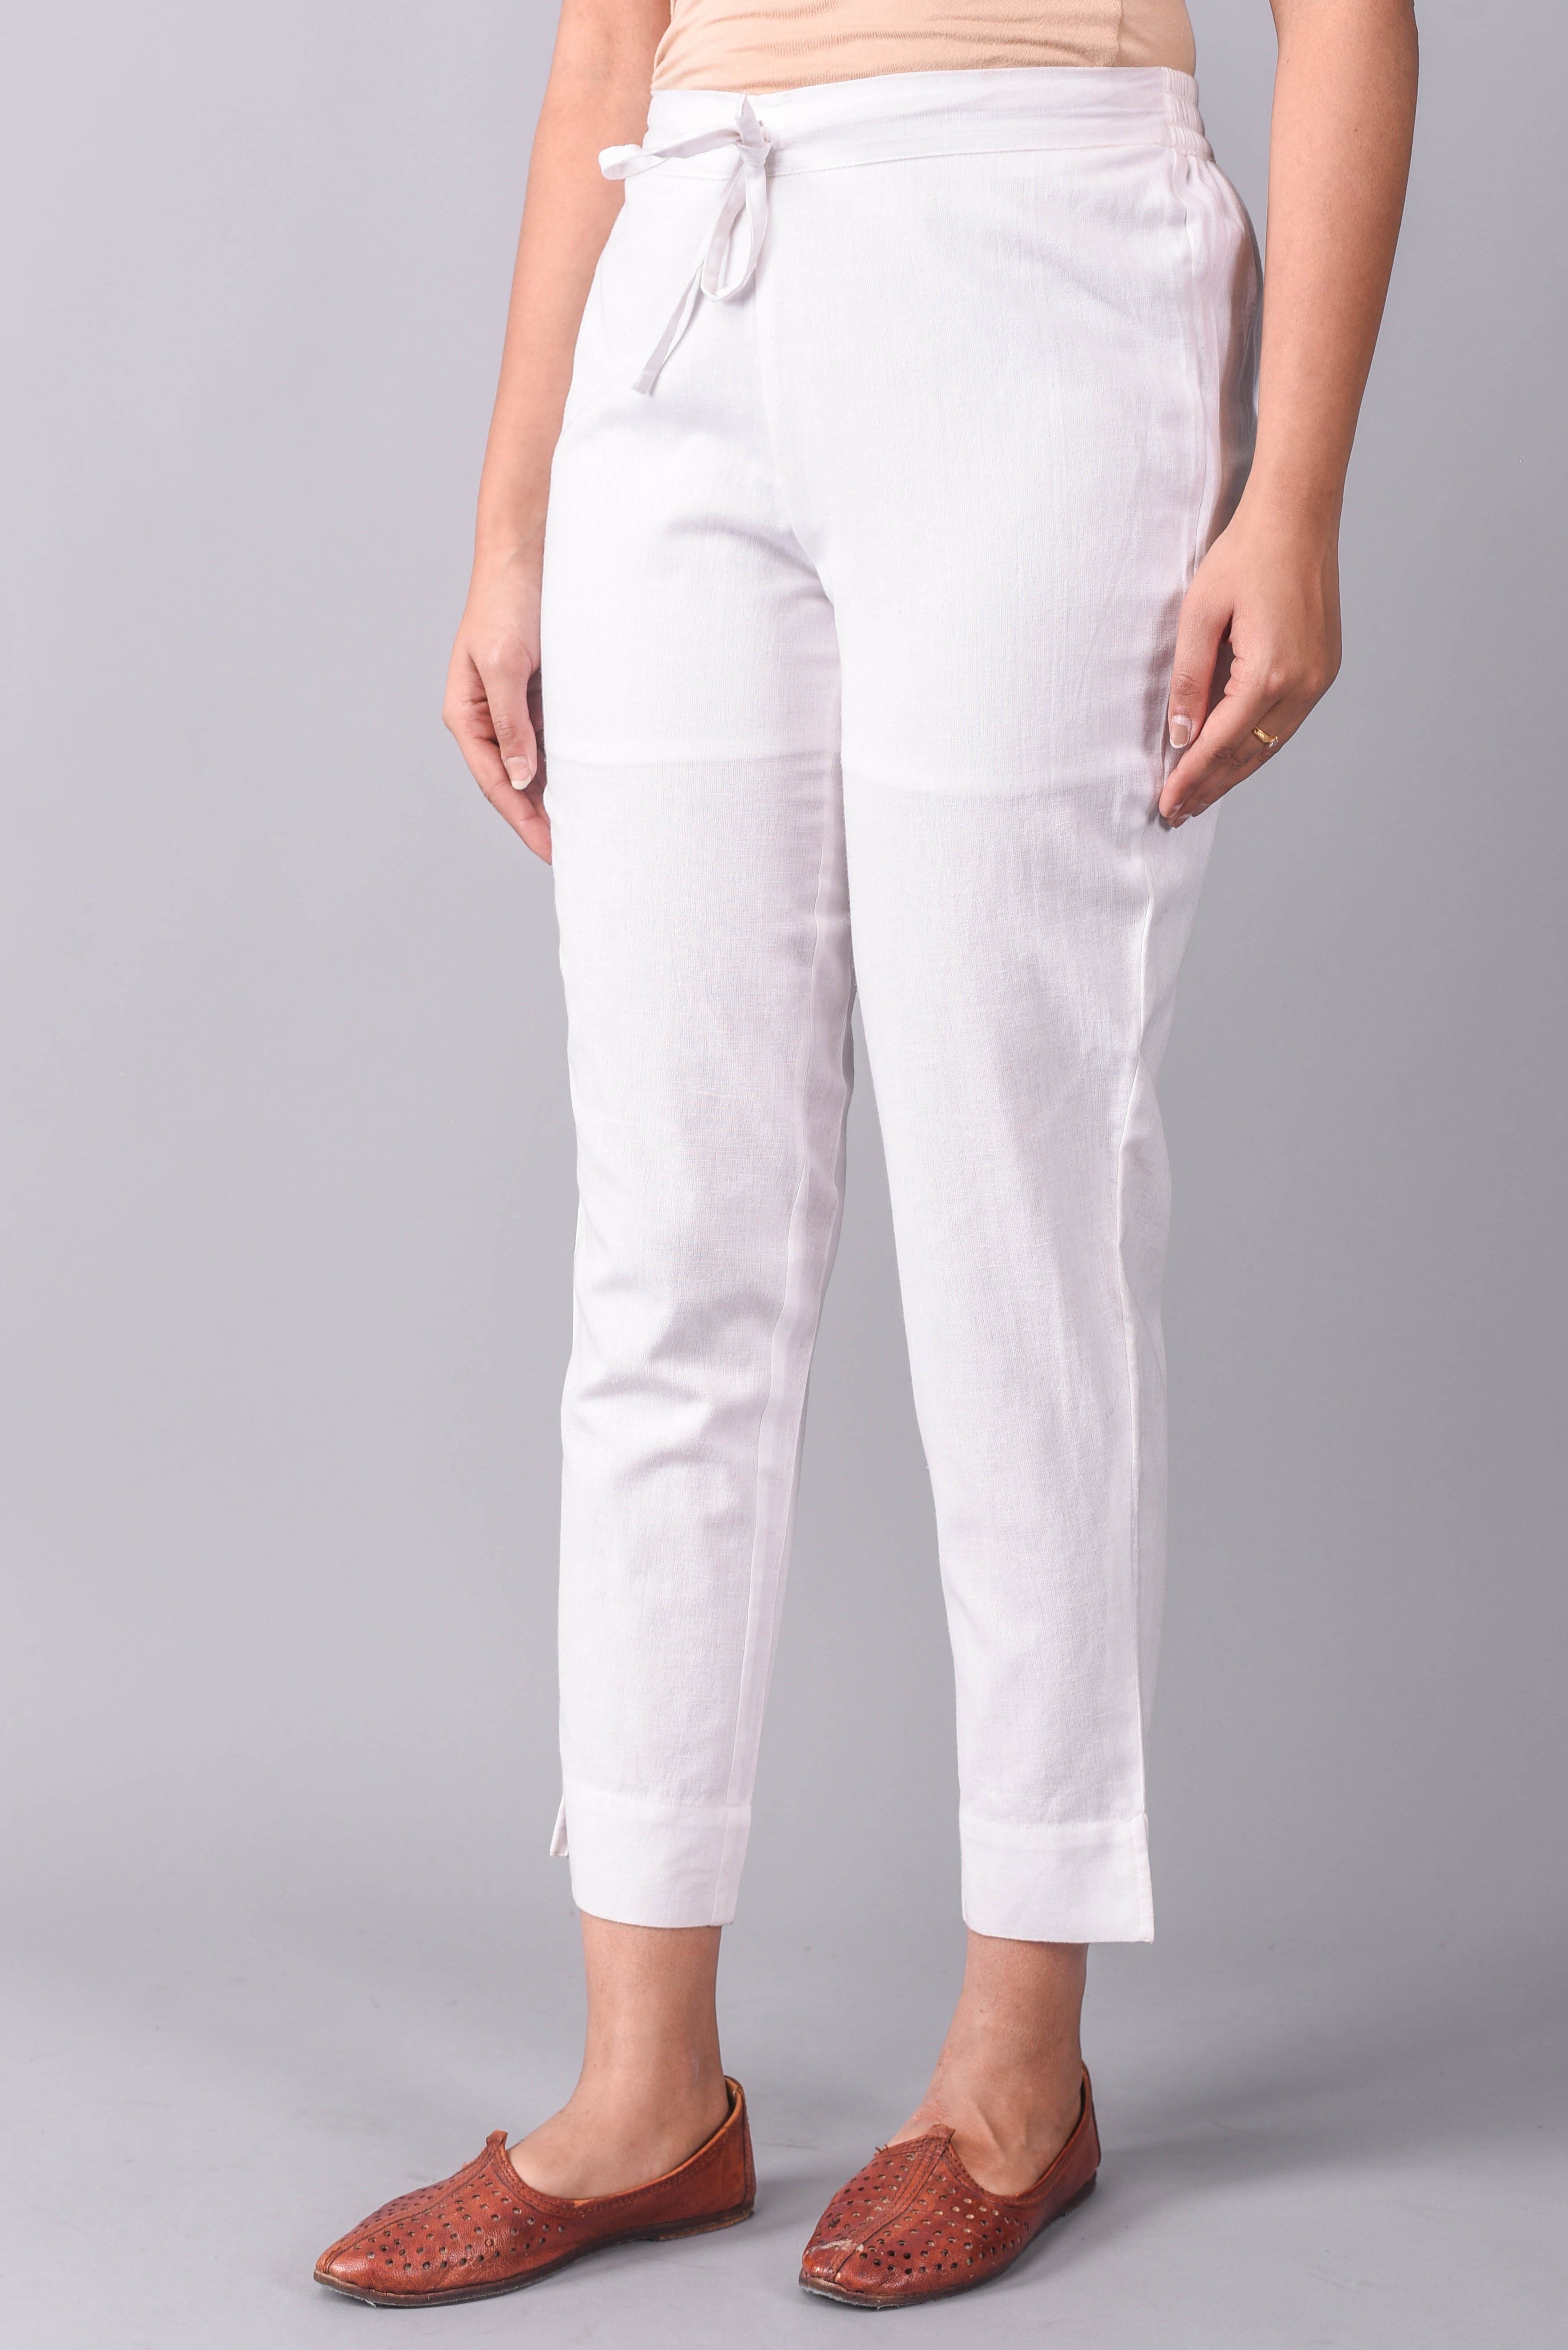 Buy Niharika stretchable white XL cigarette pants at Amazon.in